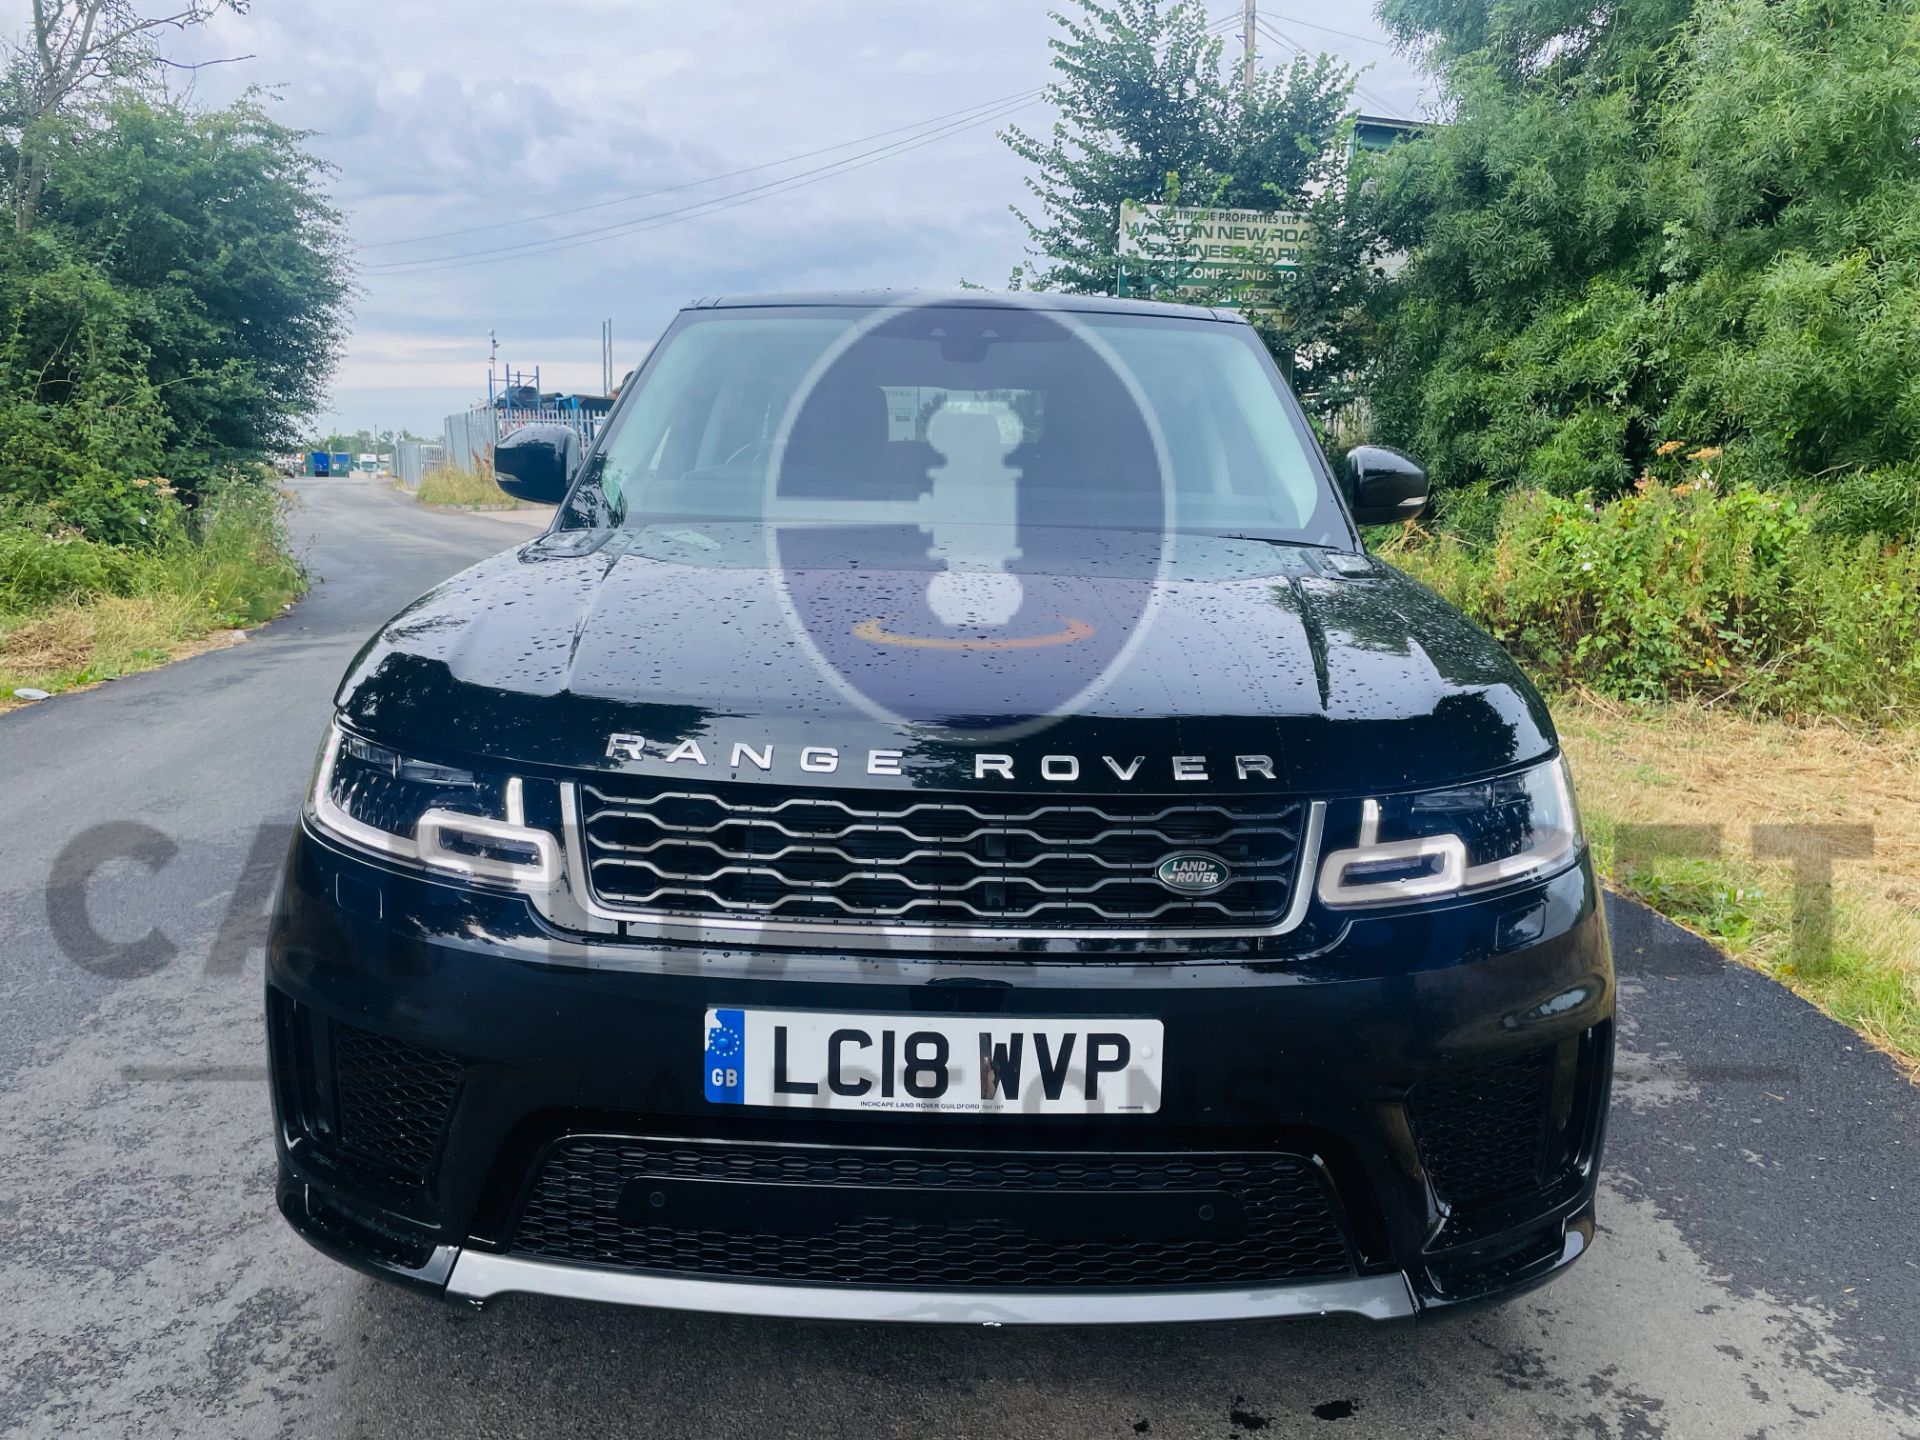 RANGE ROVER SPORT *HSE EDITION* SUV (2018 - NEW MODEL) EURO 6 DIESEL - 8 SPEED AUTOMATIC *HUGE SPEC* - Image 4 of 60